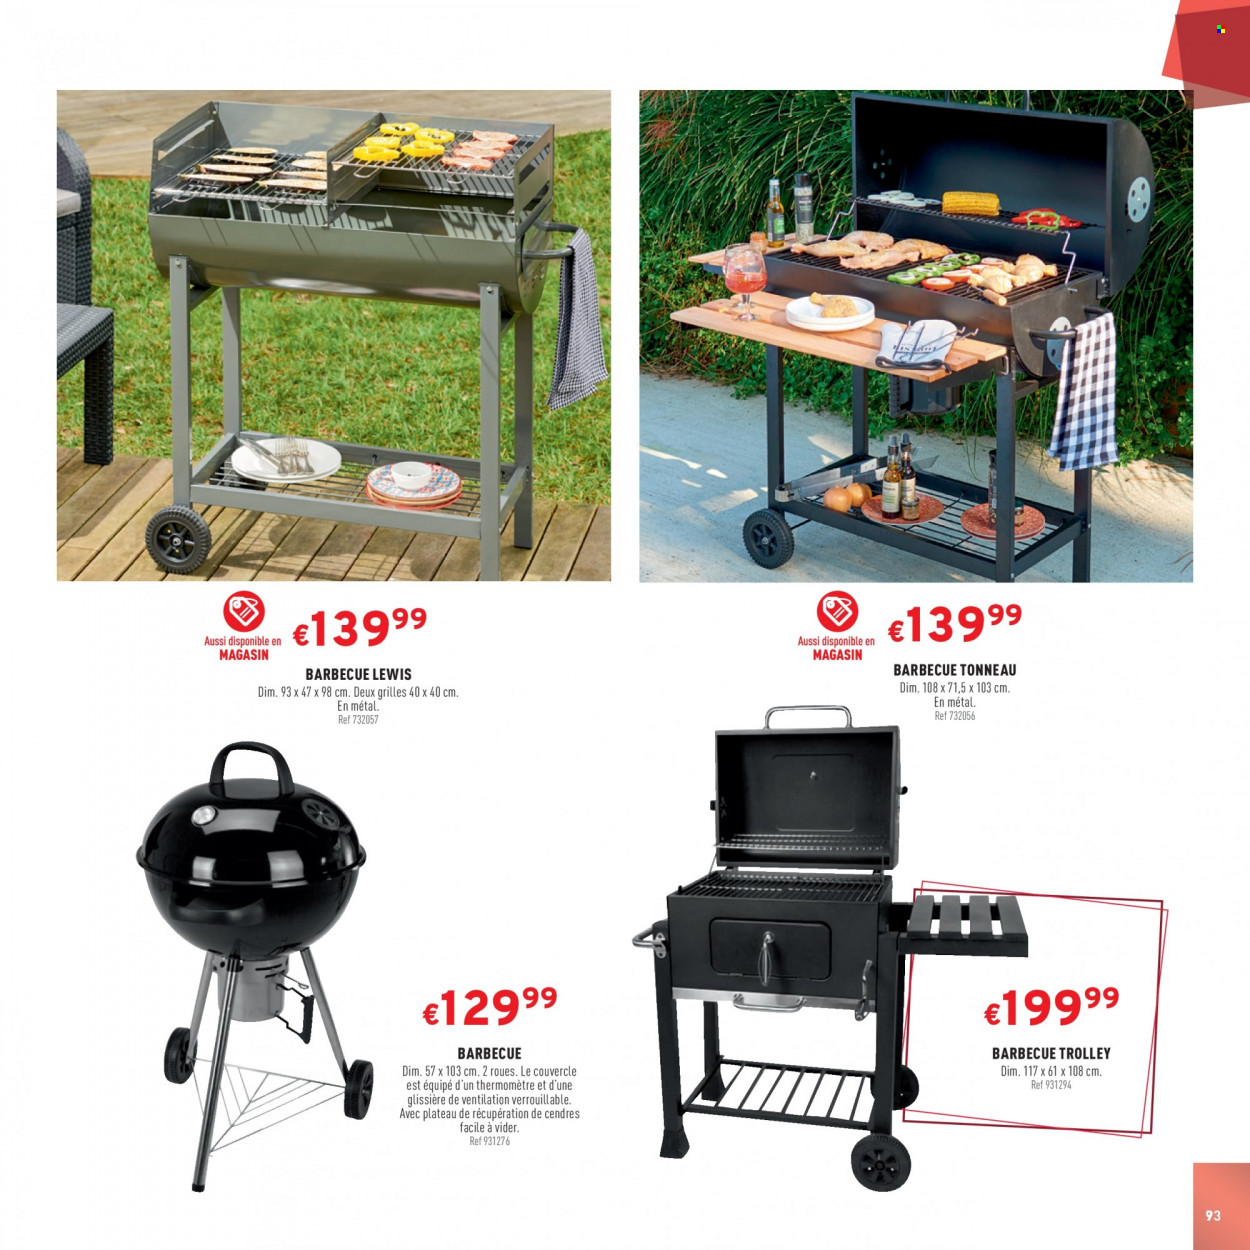 thumbnail - Catalogue Trafic - Produits soldés - thermomètre, trolley, barbecue. Page 93.